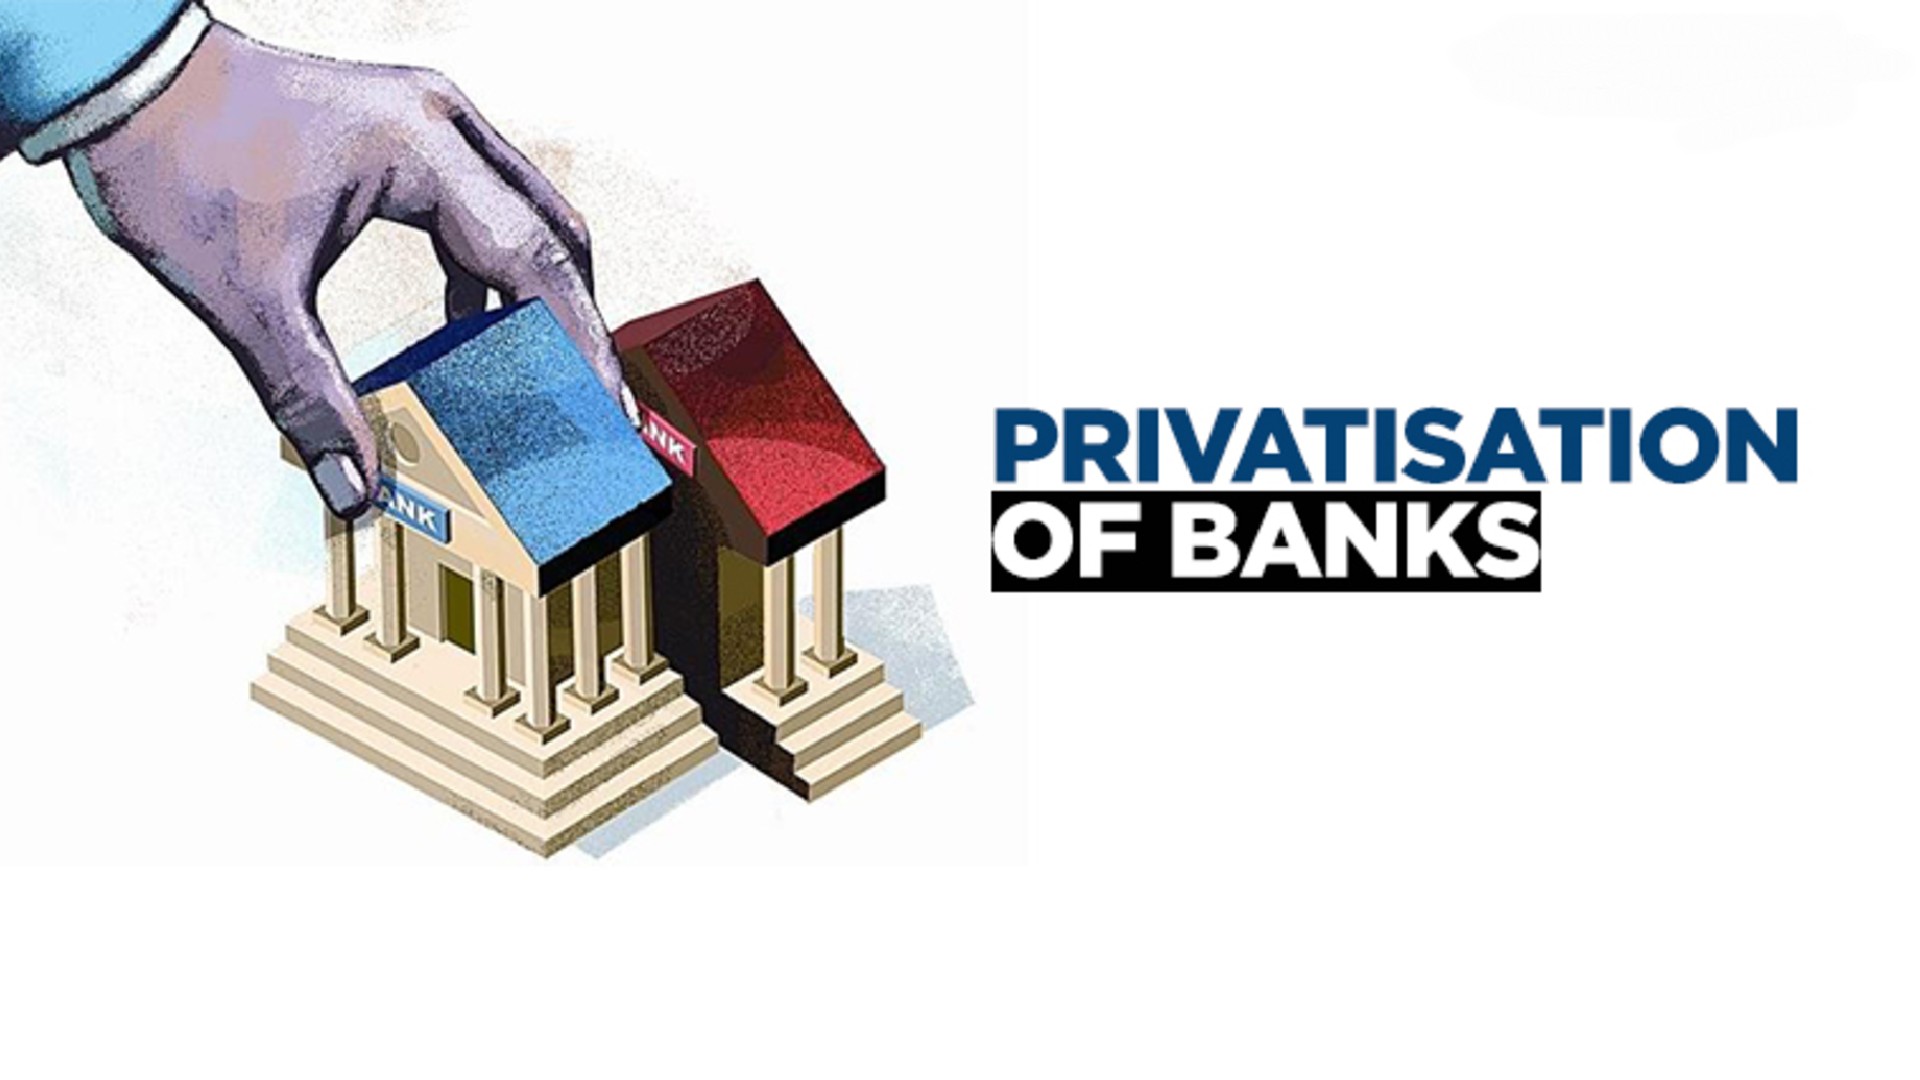 Bank Of Maharashtra, Bank Of India, Indian Overseas Bank Will Be Sold To Private Firms